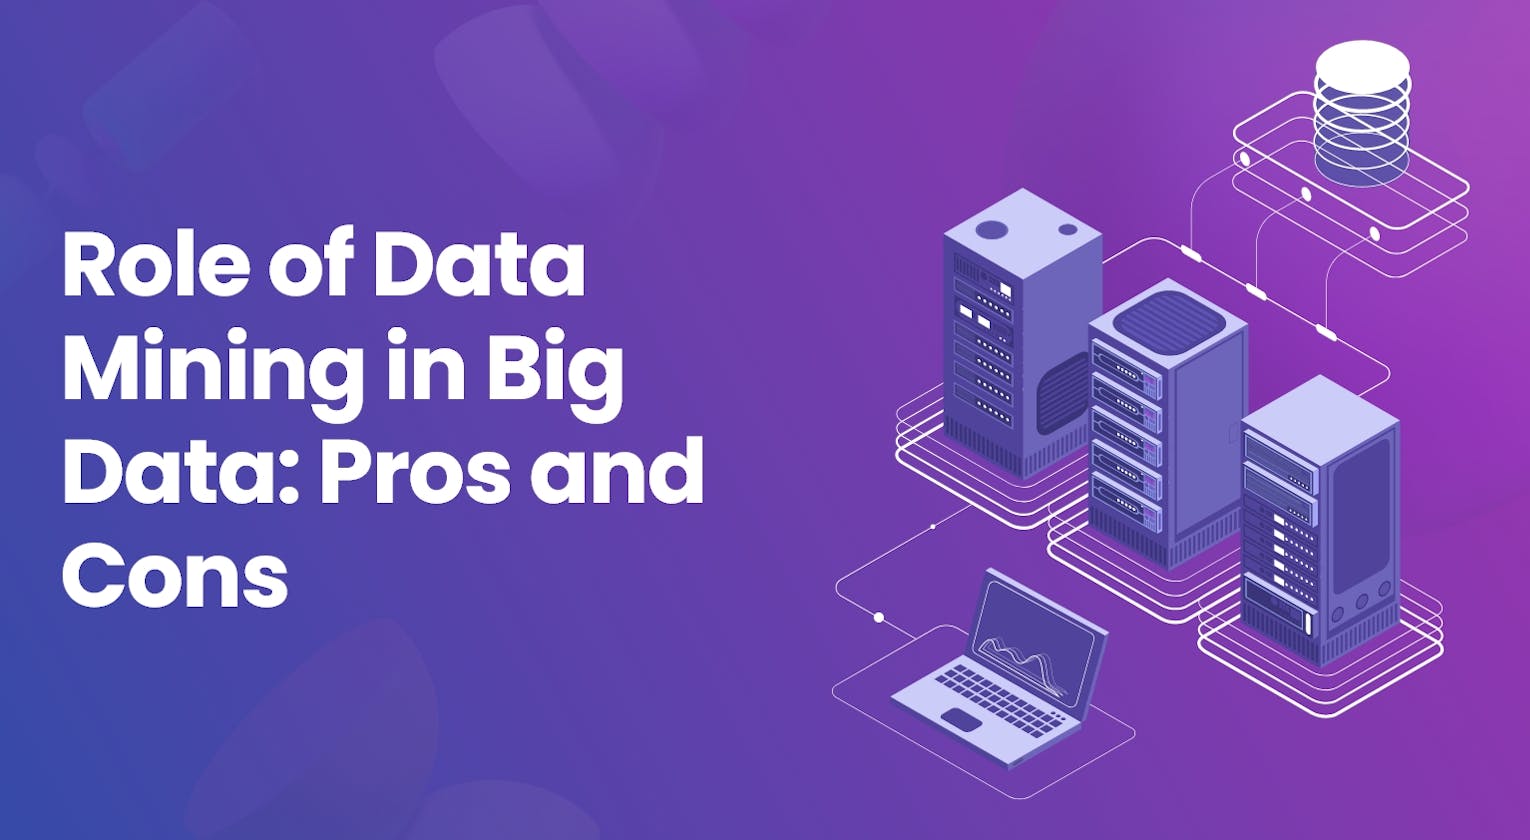 Role of Data Mining in Big Data: Pros and Cons